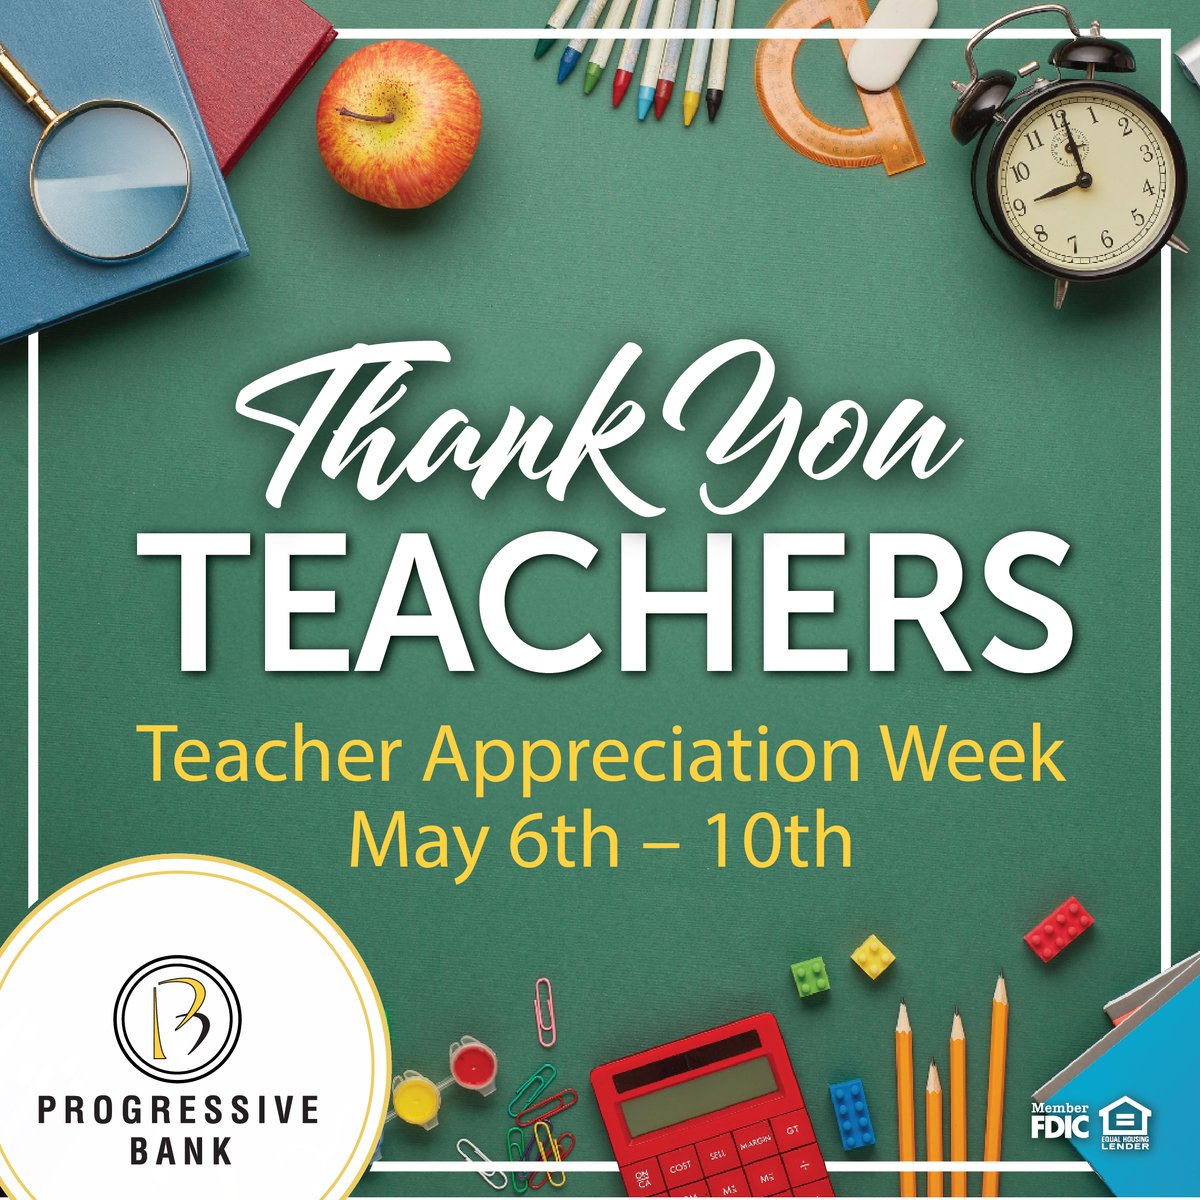 We 💗 Teachers! 

Today and every day we celebrate our teachers! This week lets show them some extra love, support, and recognition for all of their hard work! 

#ProgressiveBank #LocalBank